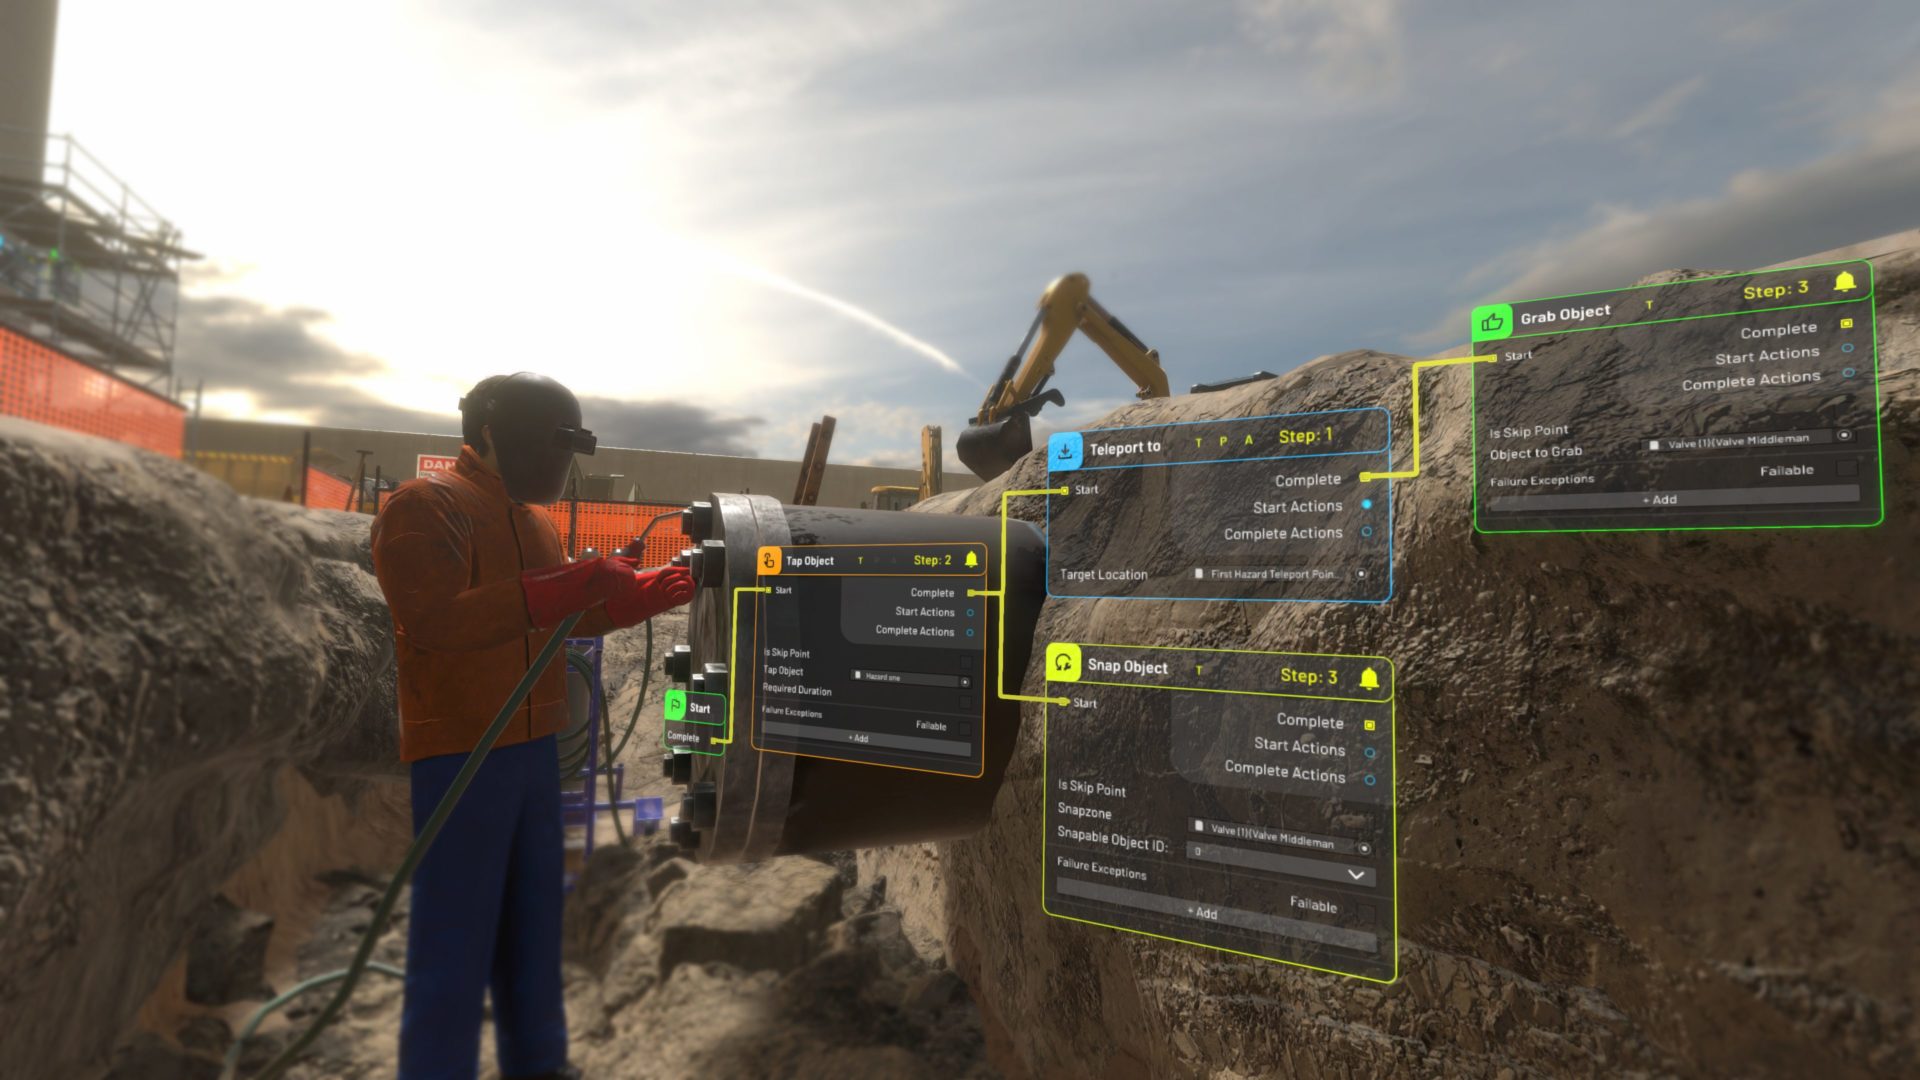 VR character engaging in construction hazard recognition training in a virtual environment